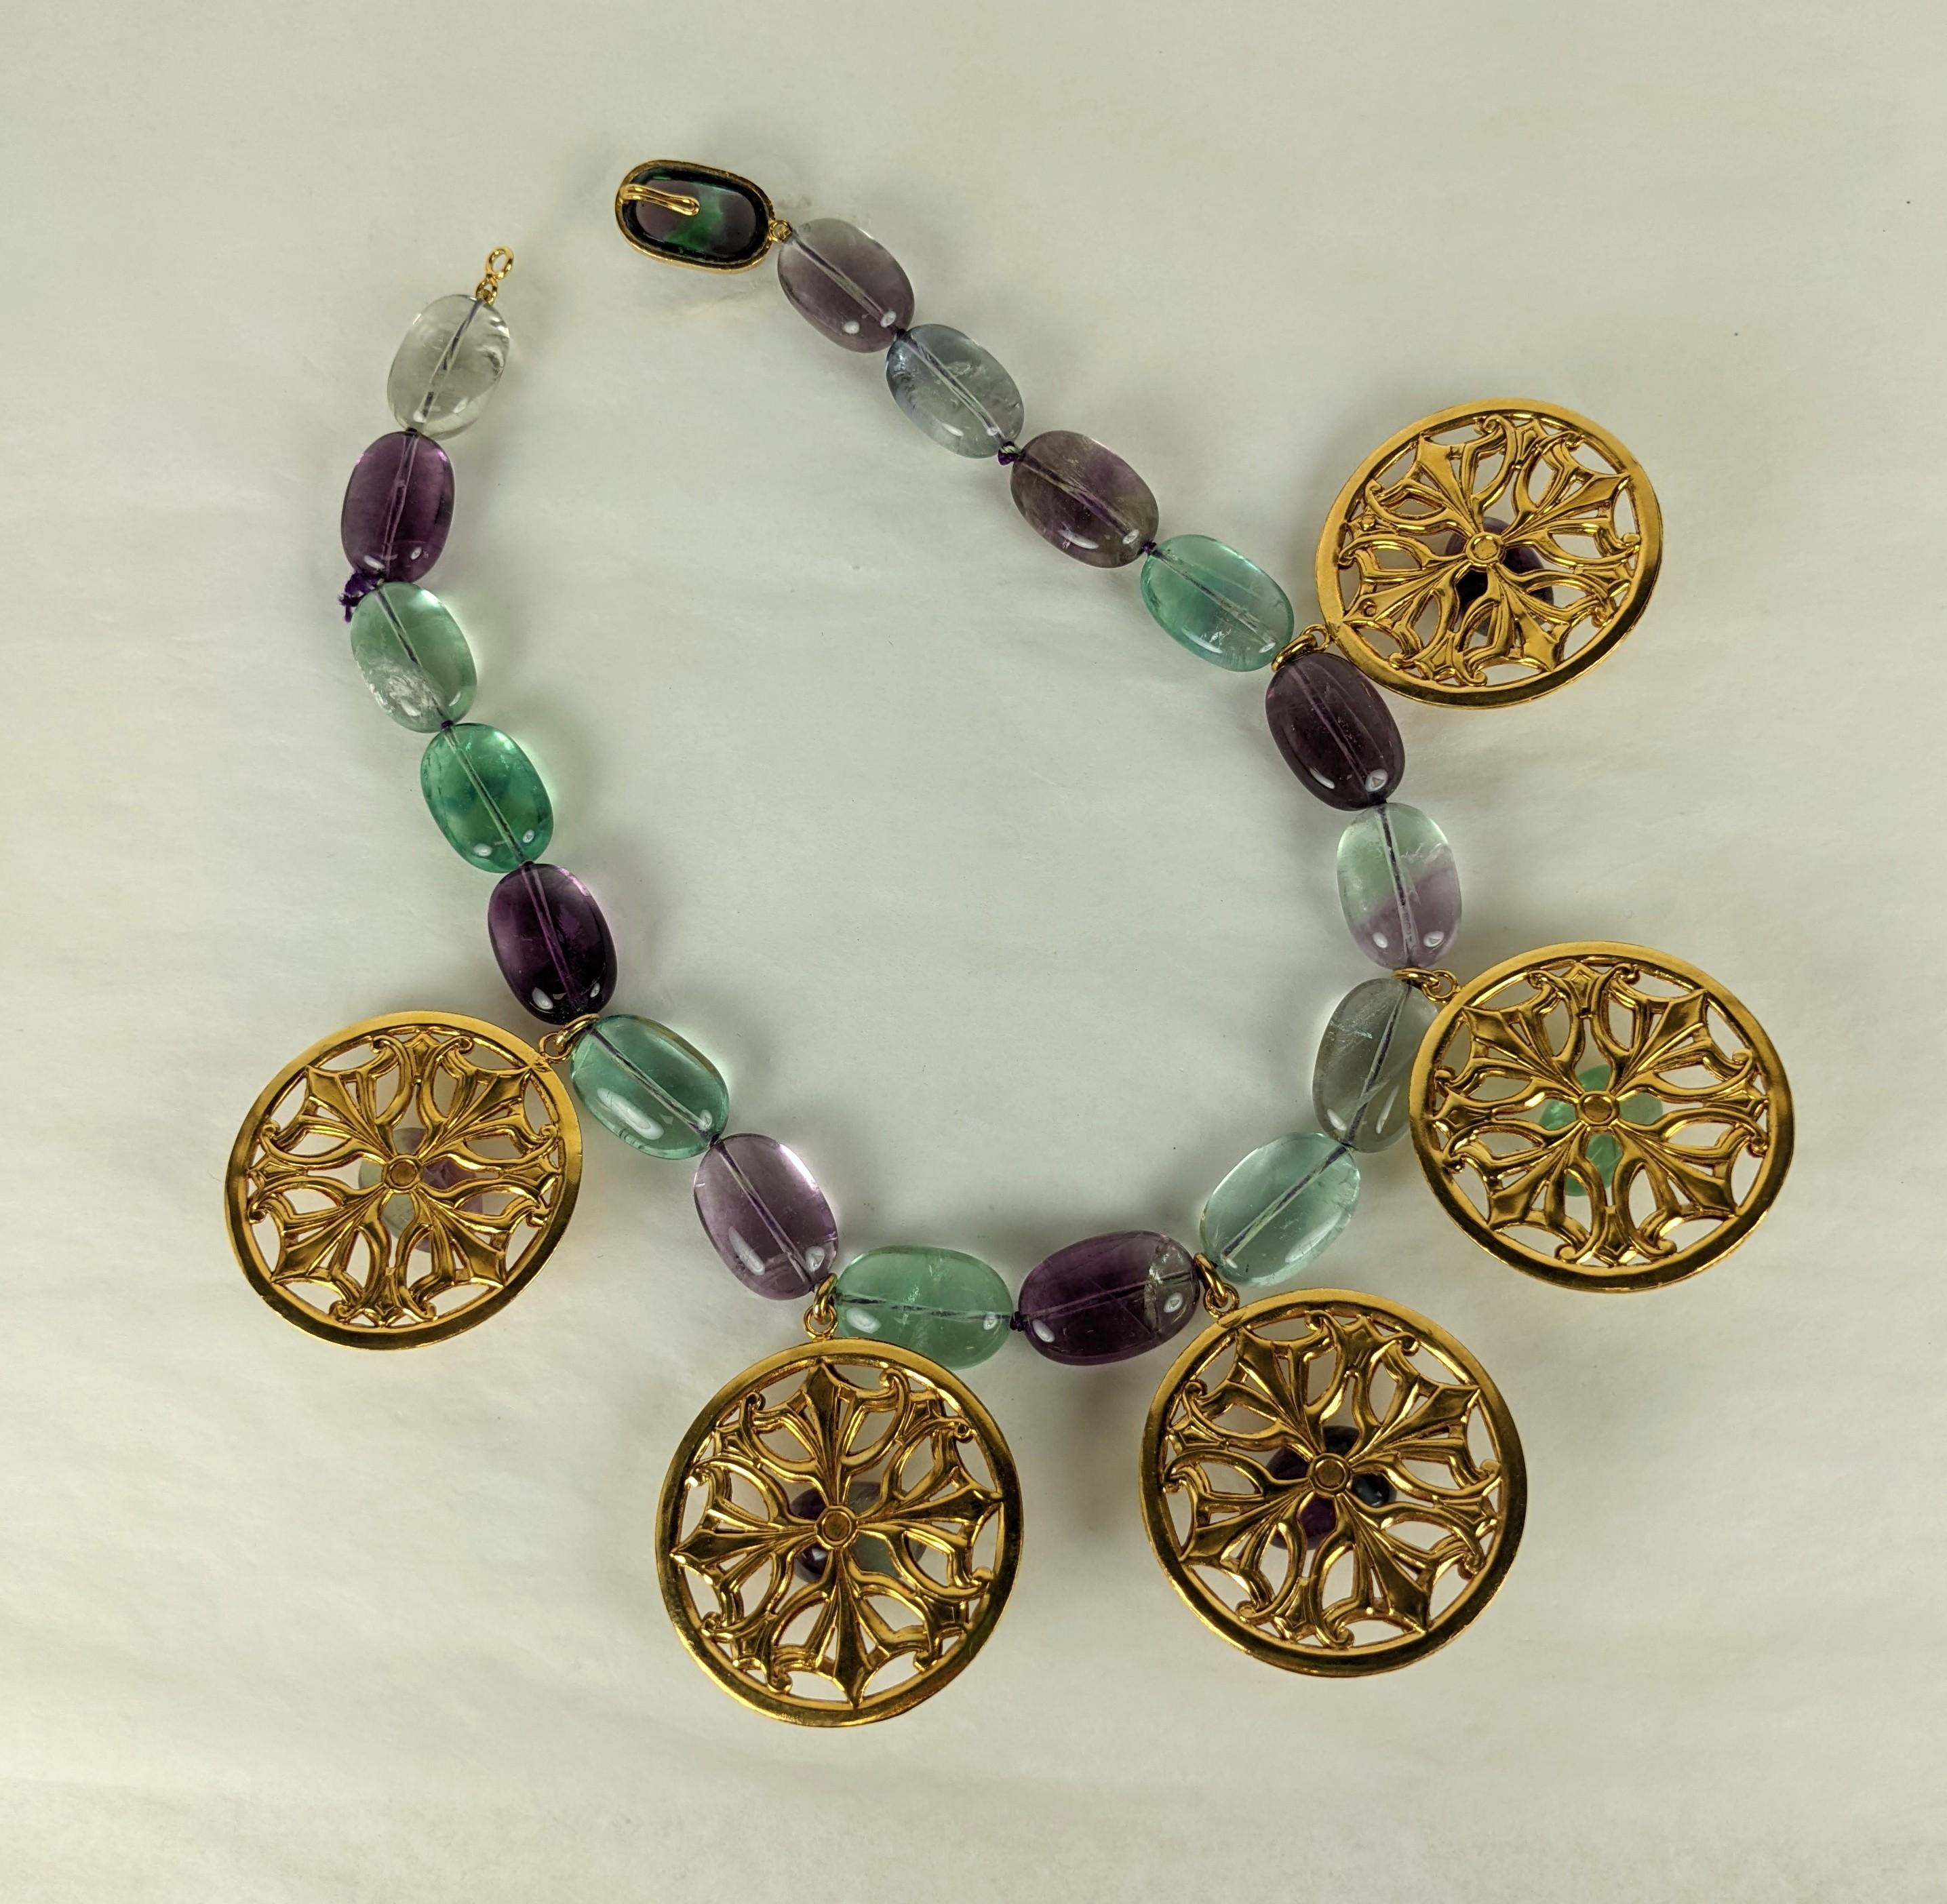 Yves Saint Laurent Fluorite and Gilt Bronze Necklace, Maison Goossens In Excellent Condition For Sale In New York, NY